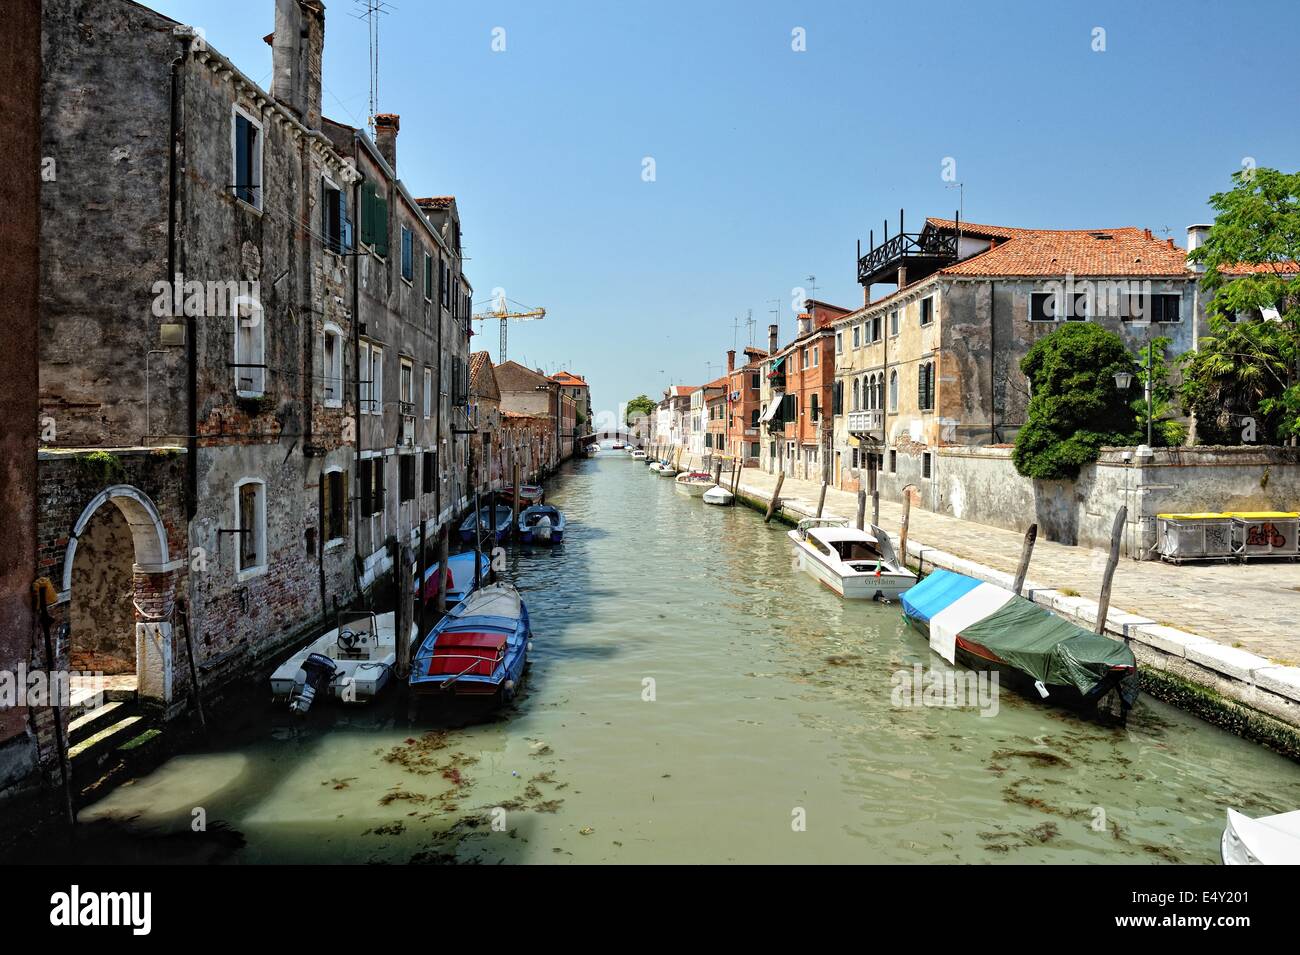 Venetian canal and houses. Stock Photo